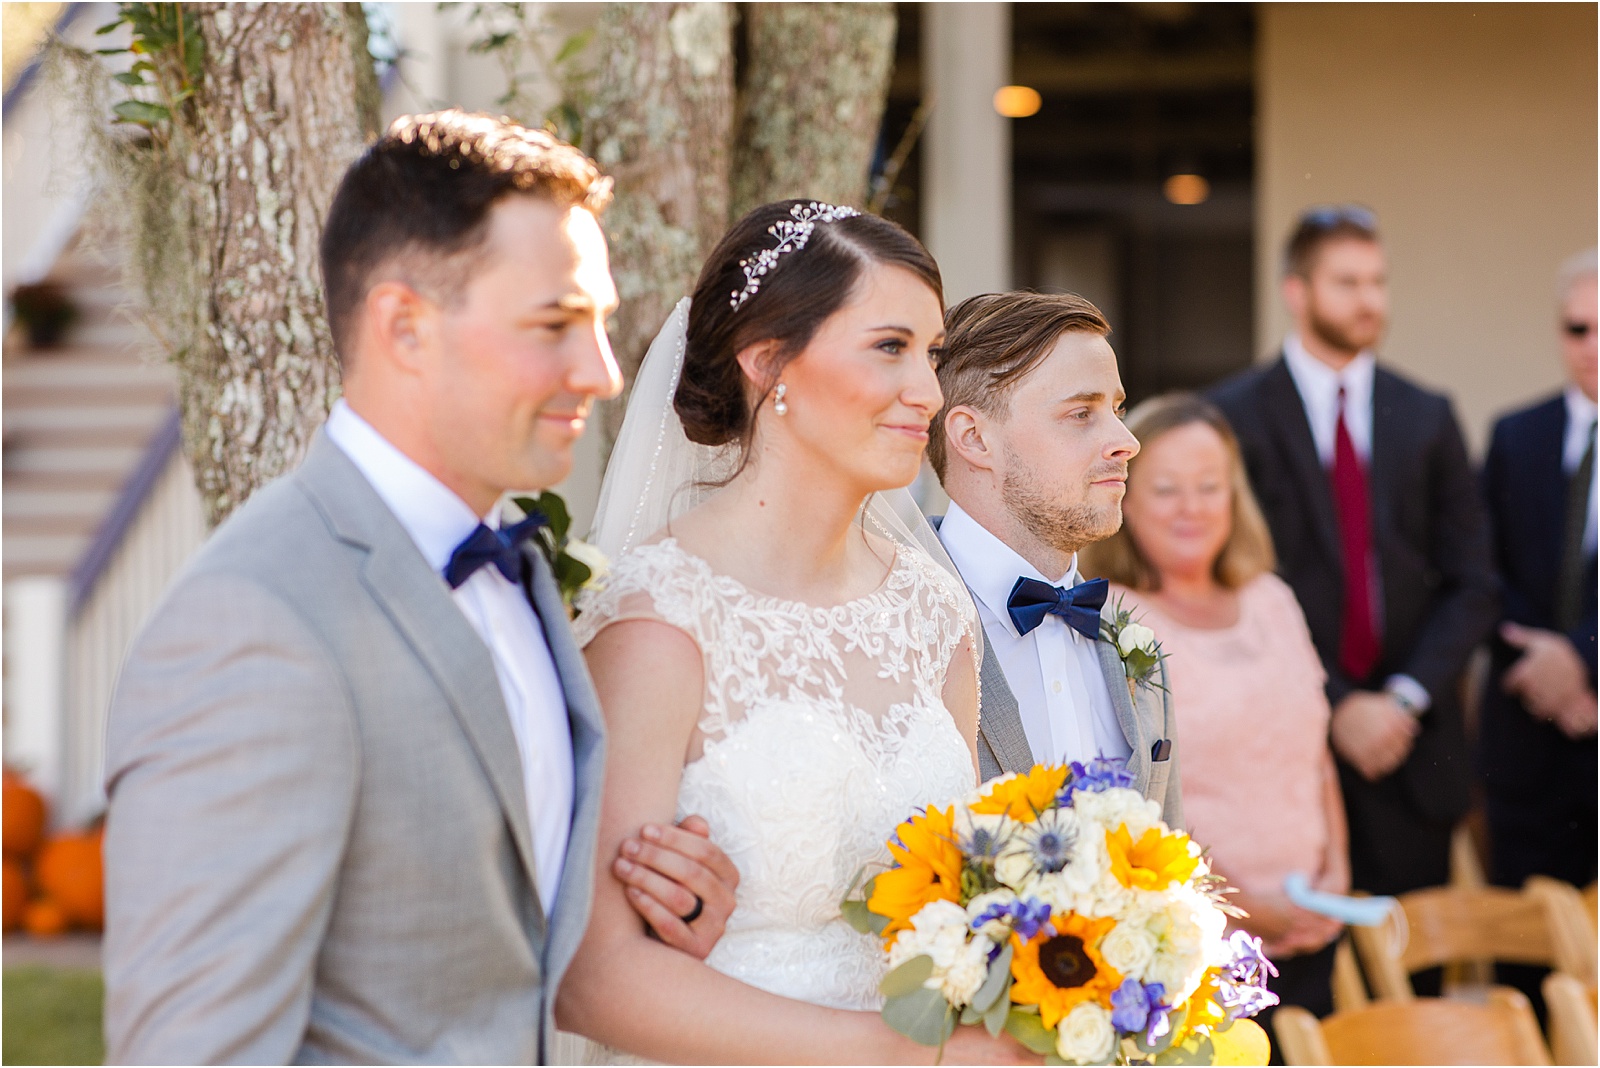 Bride walks with brothers down the aisle